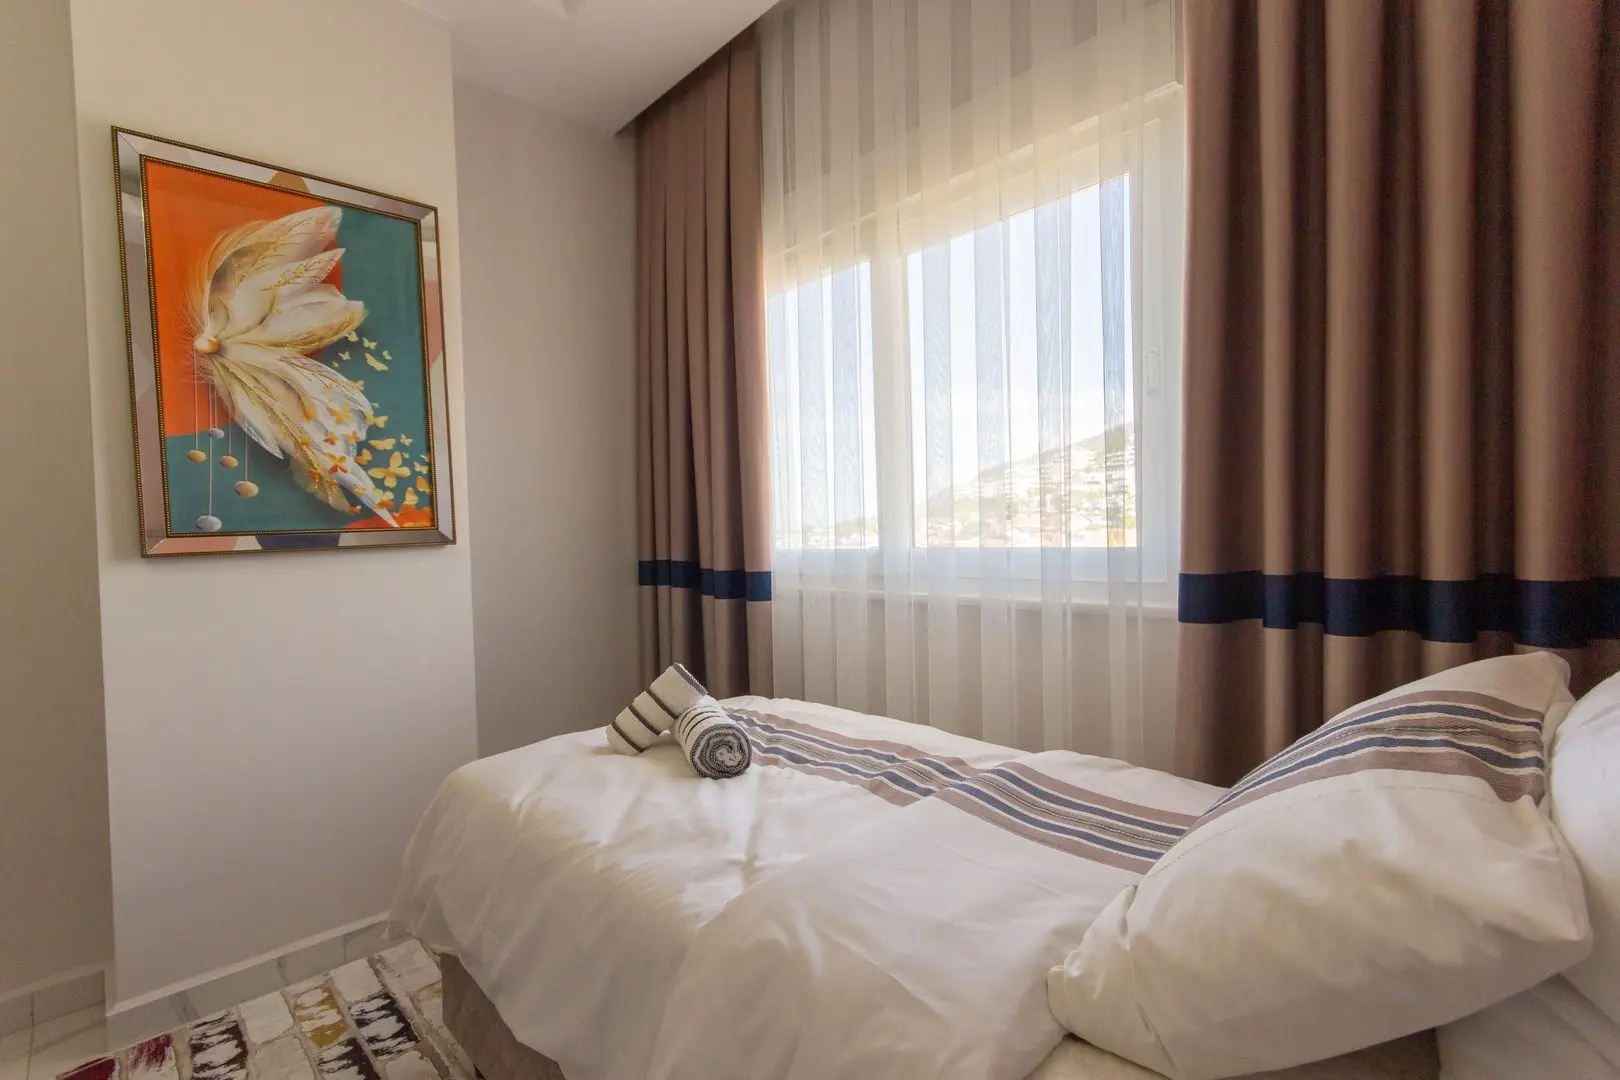 LUXURY 4+1 DUPLEX APARTMENT WITH SEA VIEW IN DEMIRTAŞ